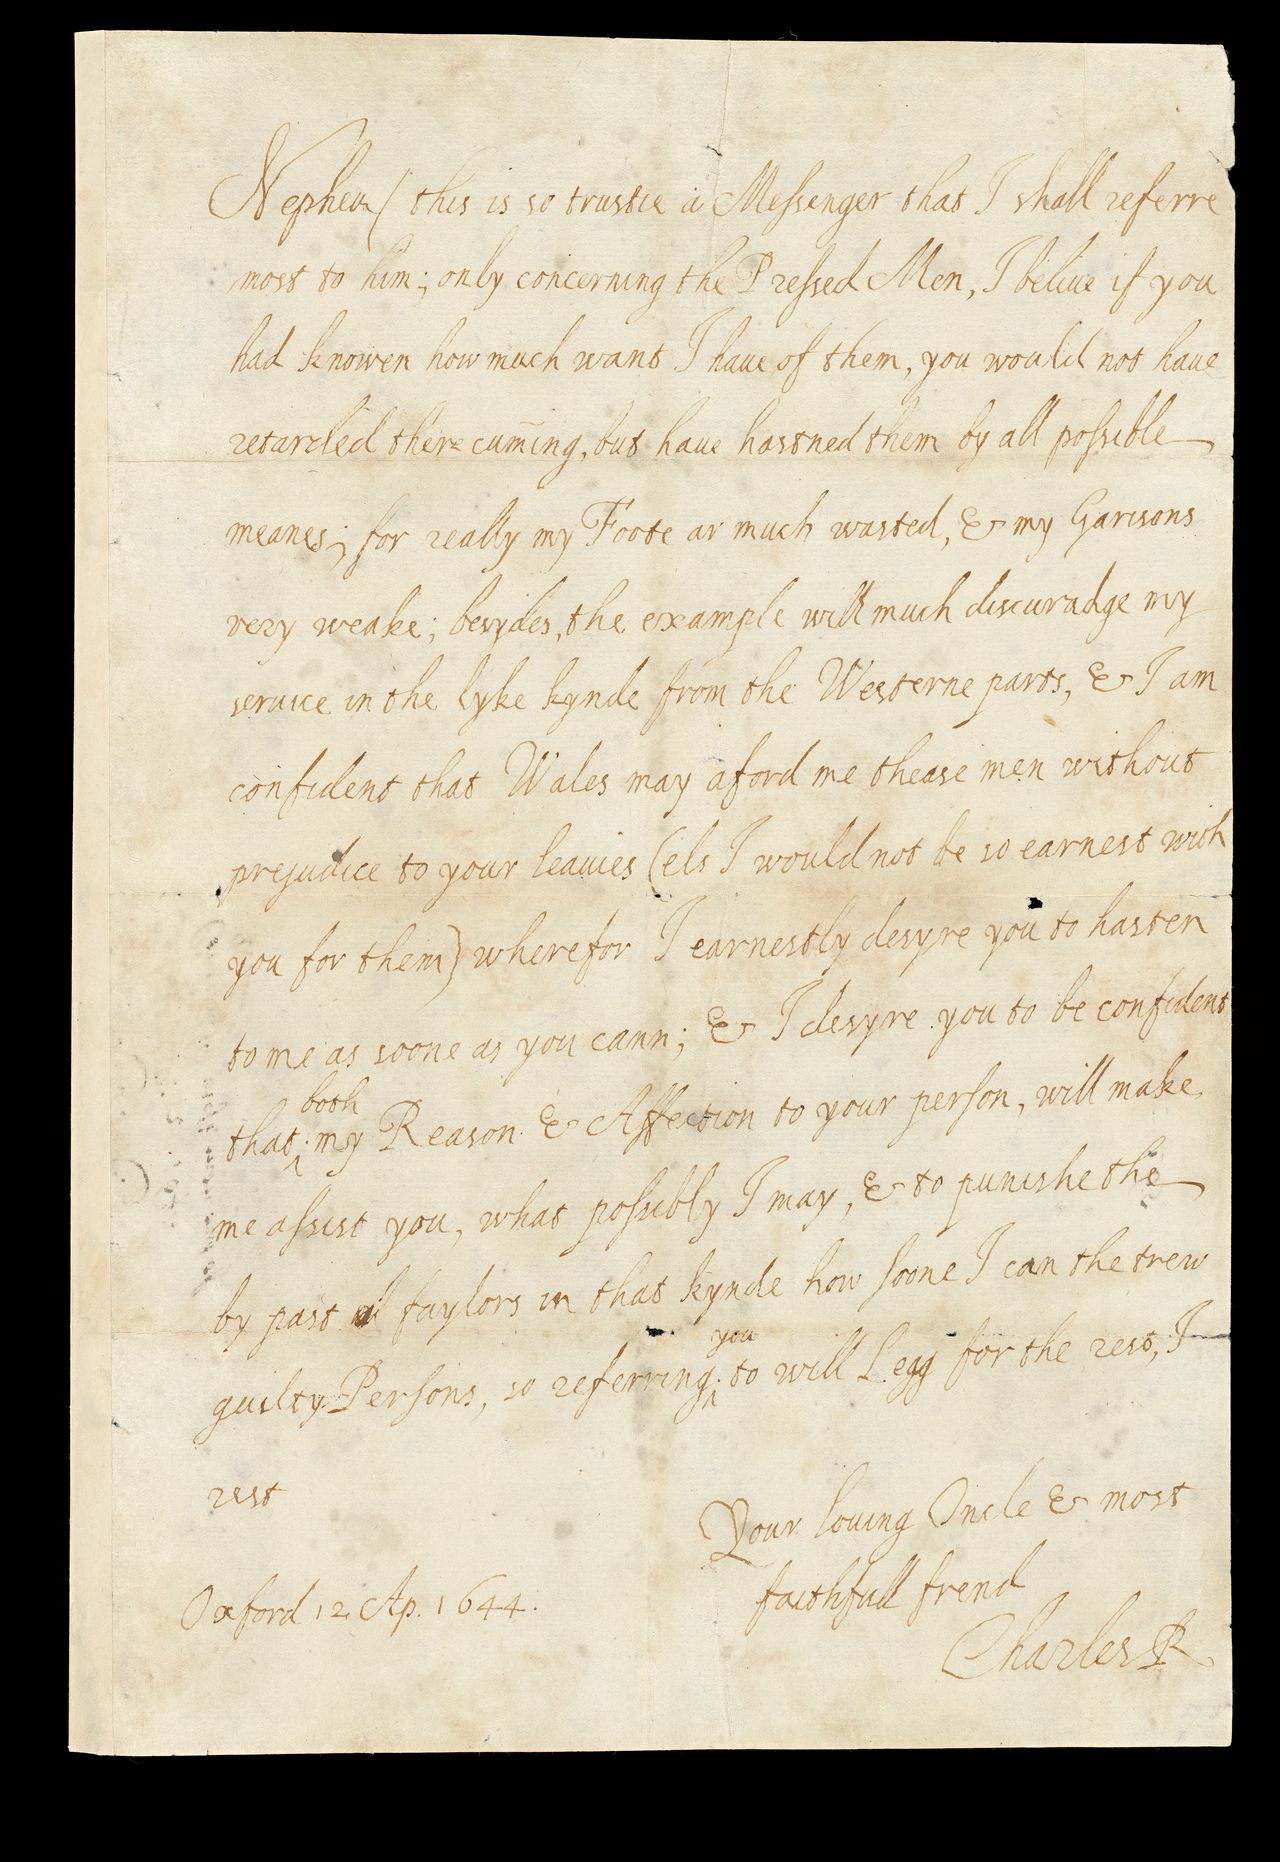 Letter from Charles I to his nephew Rupert 12 April 1644, State Library Victoria, Melbourne (RAREEMM 222/20)